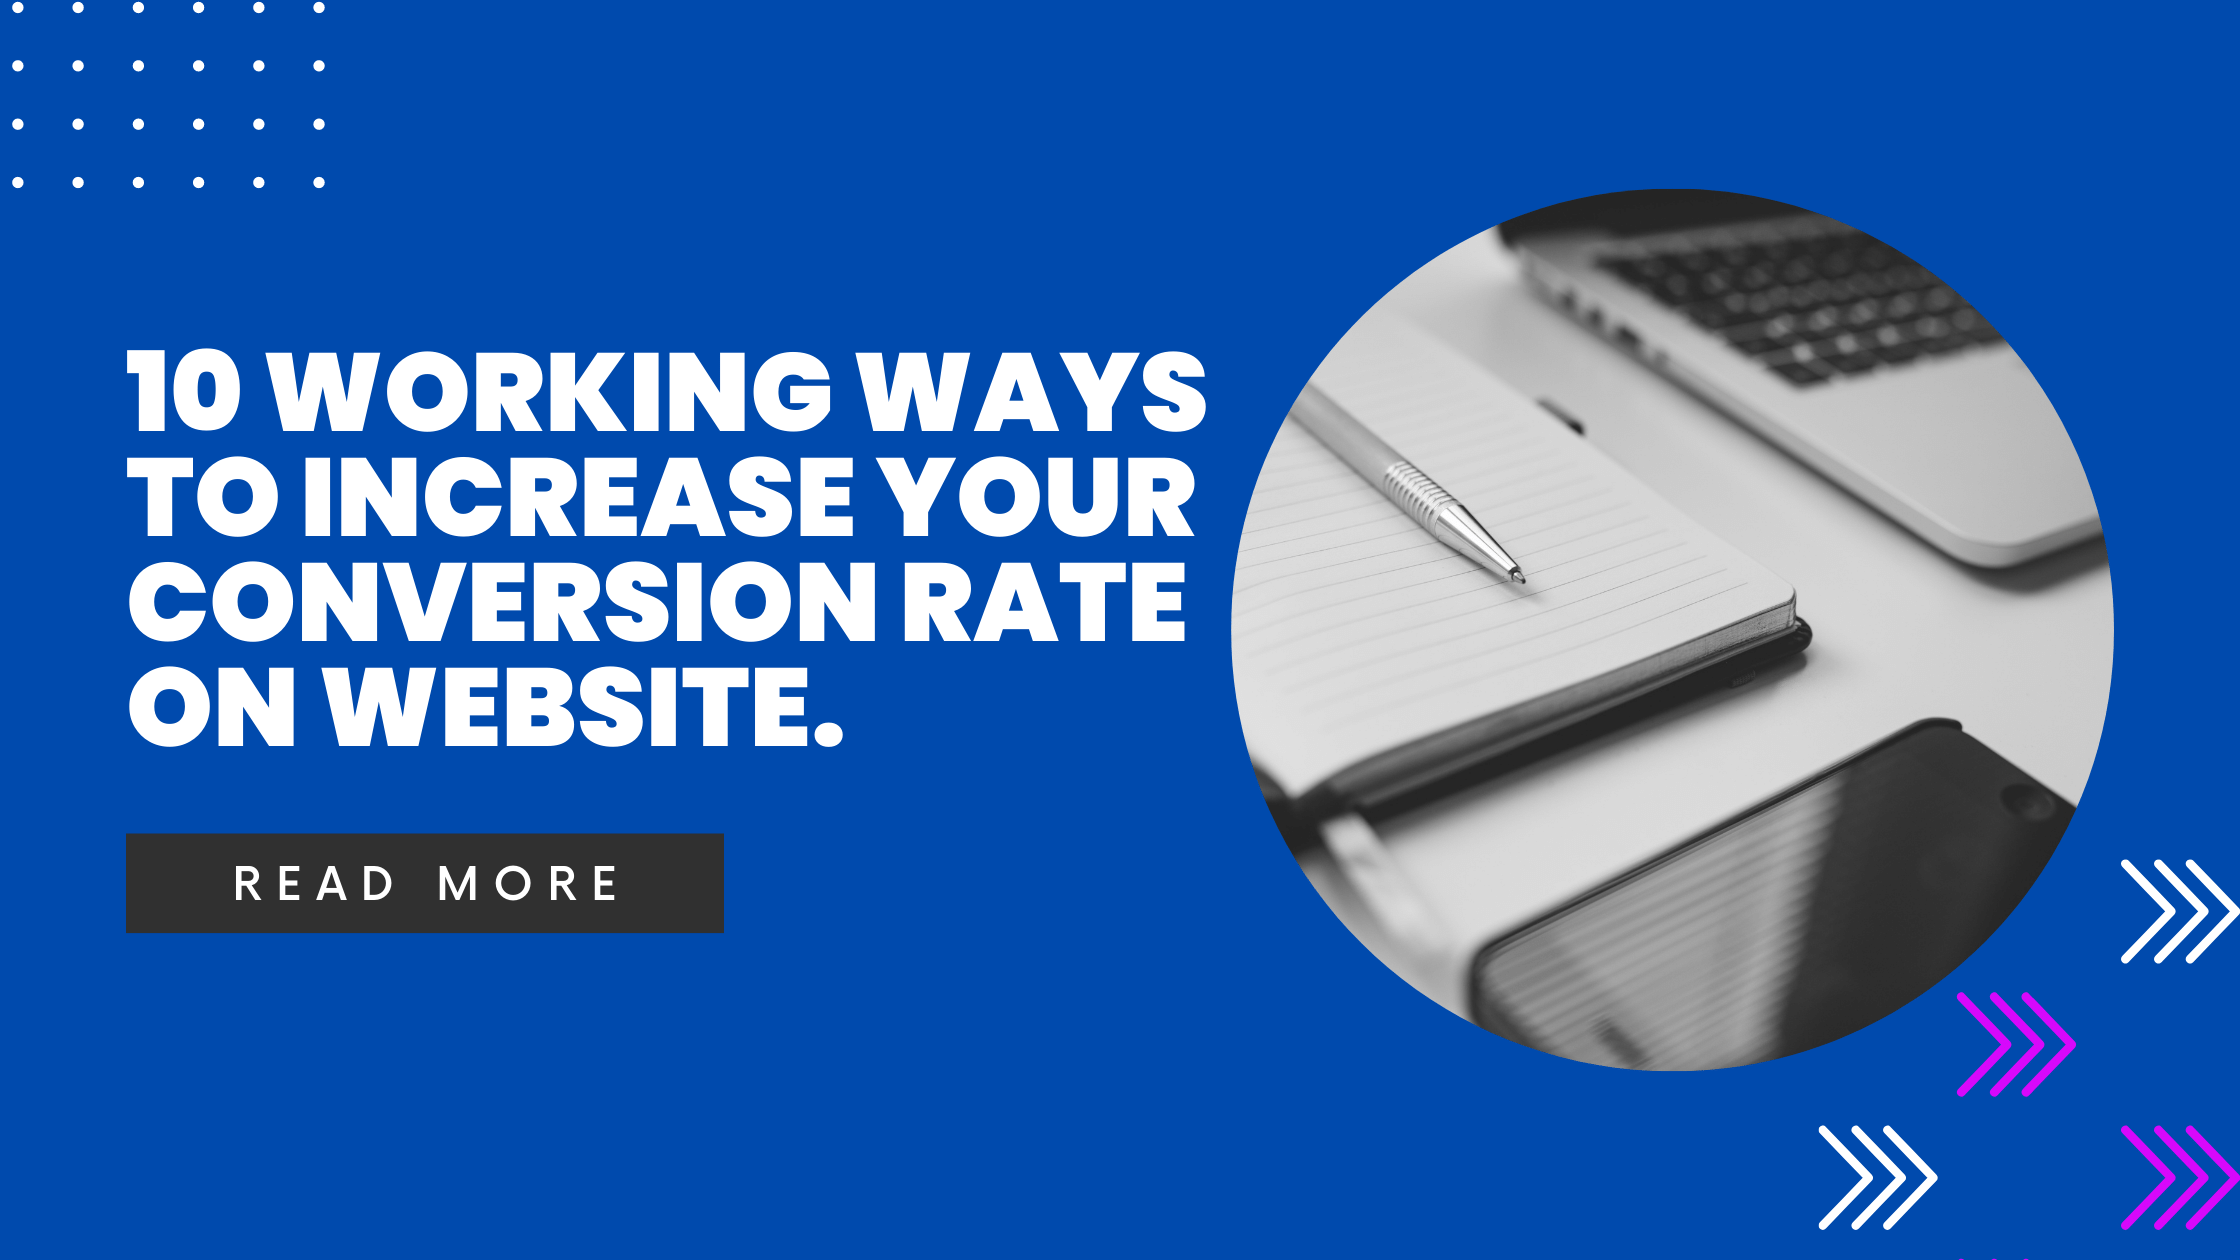 10 Working Ways To Increase Your Conversion Rate On Website.